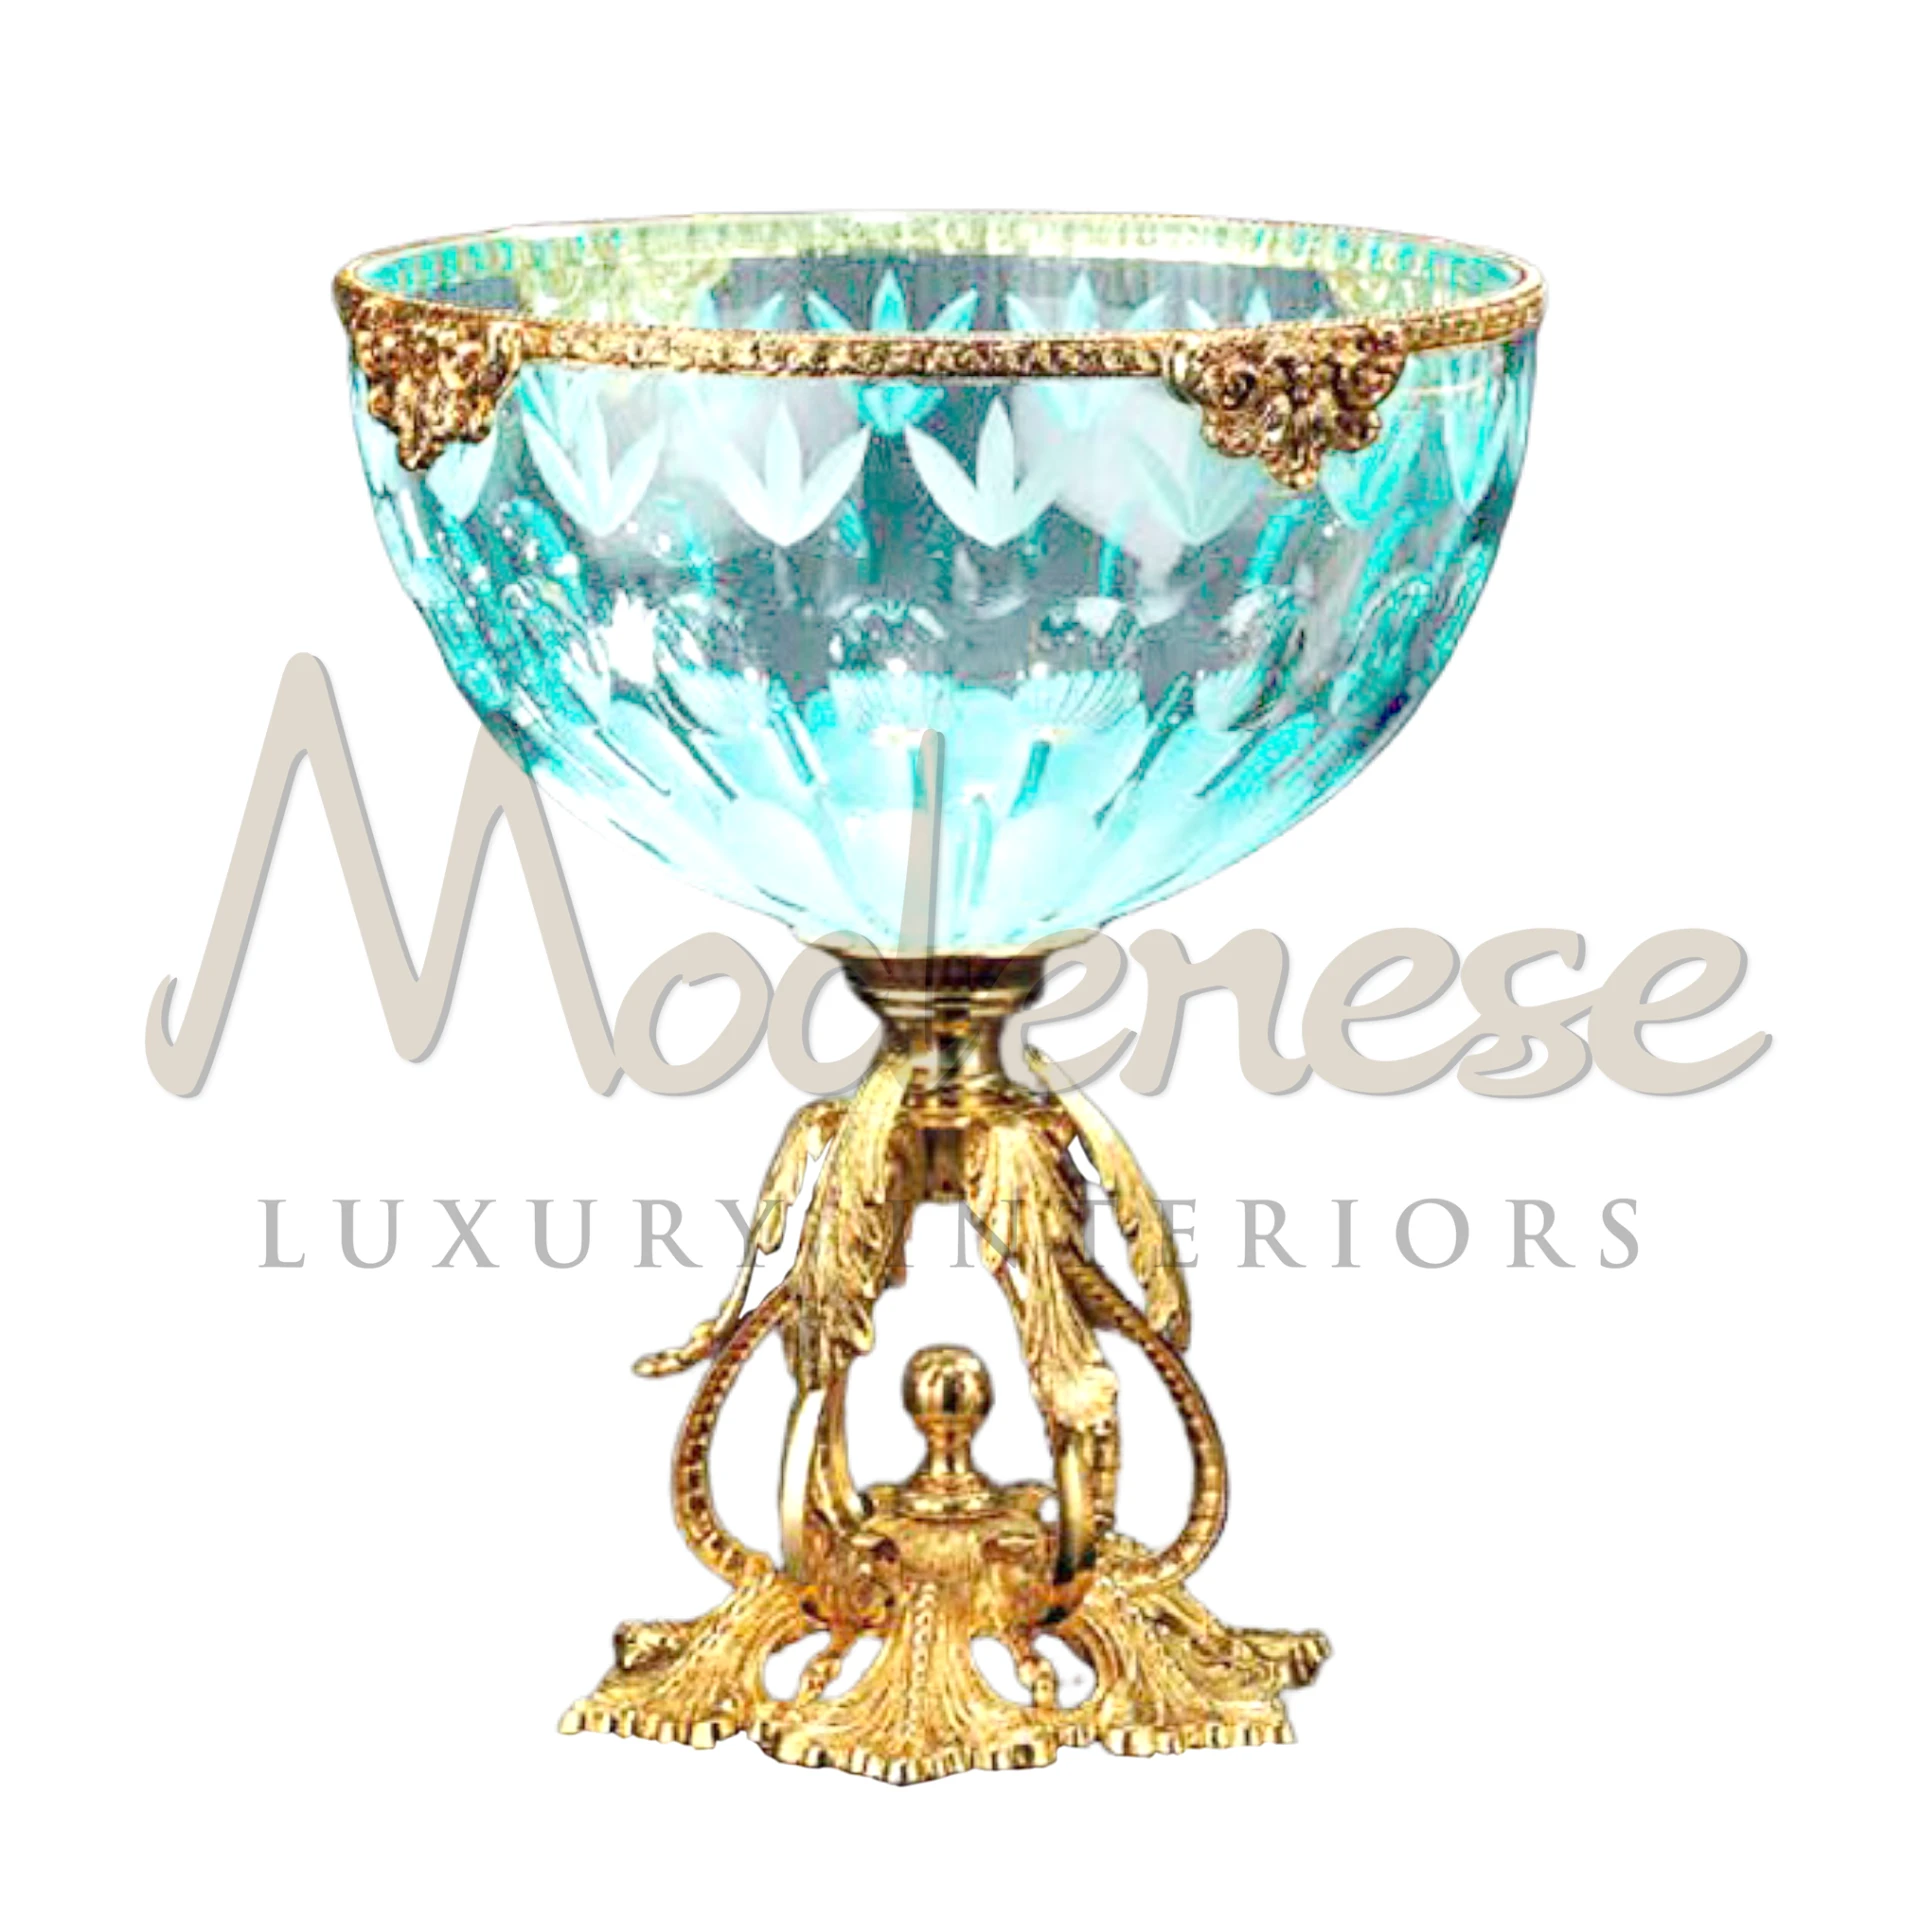 Gorgeous Luxury Turquoise Bowl in elegant baroque or classic style, ideal for interior design, luxury vases, and stunning centerpieces in upscale interiors.






